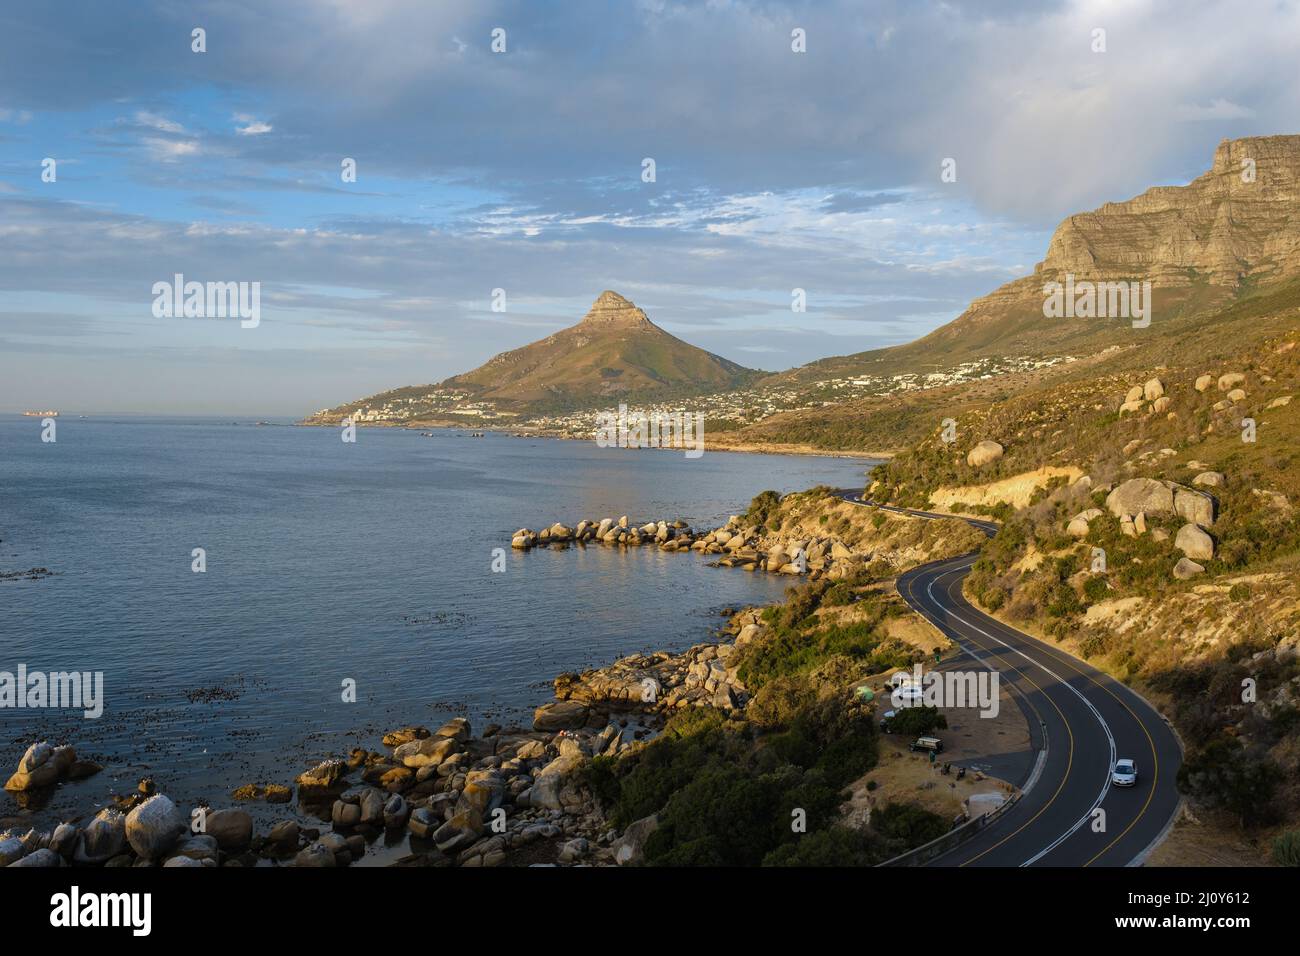 The Chapman's Peak Drive on the Cape Peninsula near Cape Town in South Africa on a bright and sunny afternoon Stock Photo